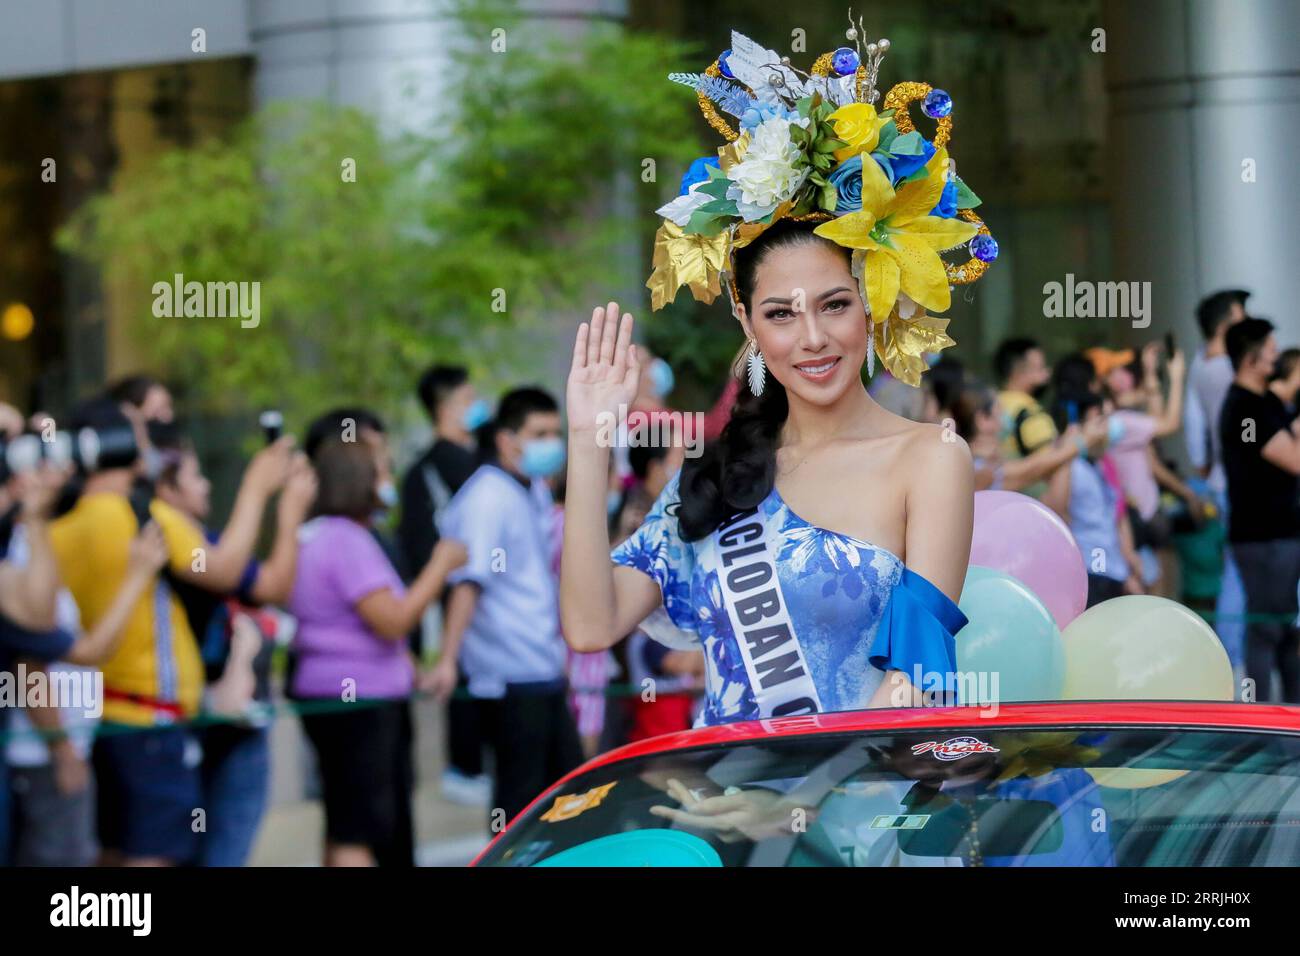 220723 -- QUEZON CITY, July 23, 2022 -- A contestant for the Binibining Pilipinas Miss Philippines 2022 attends the Grand Parade of Beauties in Quezon City, the Philippines on July 23, 2022. A total of 40 contestants will vie for the Binibining Pilipinas 2022 beauty pageant this year.  PHILIPPINES-QUEZON CITY-BEAUTY CONTEST-PARADE RouellexUmali PUBLICATIONxNOTxINxCHN Stock Photo